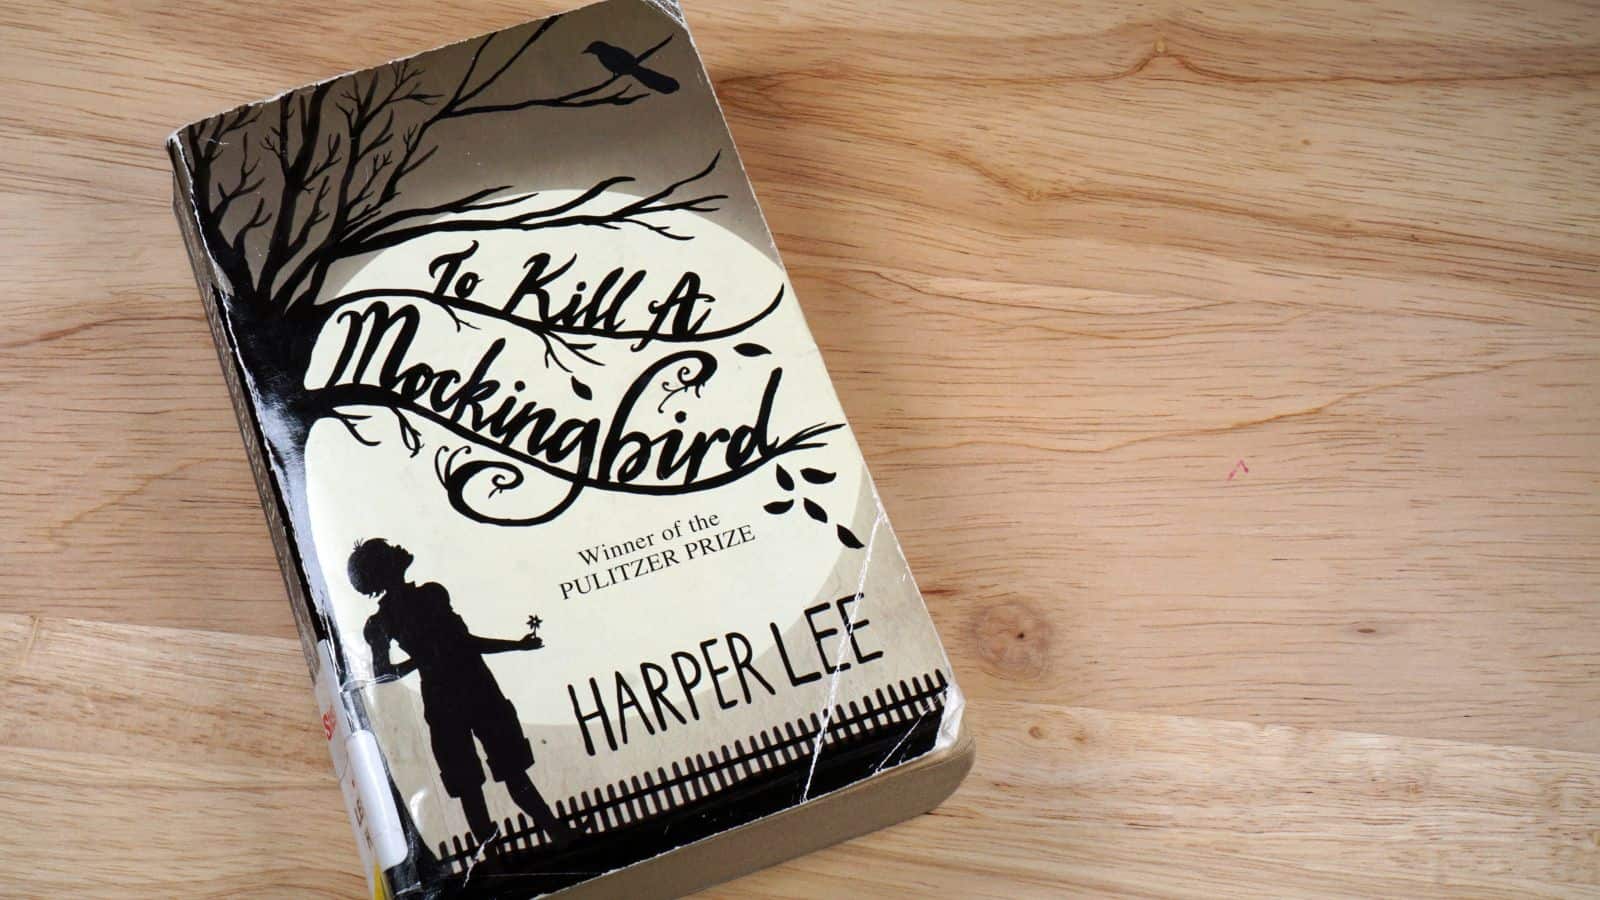 <p>To Kill a Mockingbird is considered a defining book of the twentieth century, so everyone should read it at least once. It explores life in 1930s southern America through the innocent eyes of a child, telling the story of a black man accused of a crime that he didn't commit, facilitated by the horrific real-life racism of the time.</p>